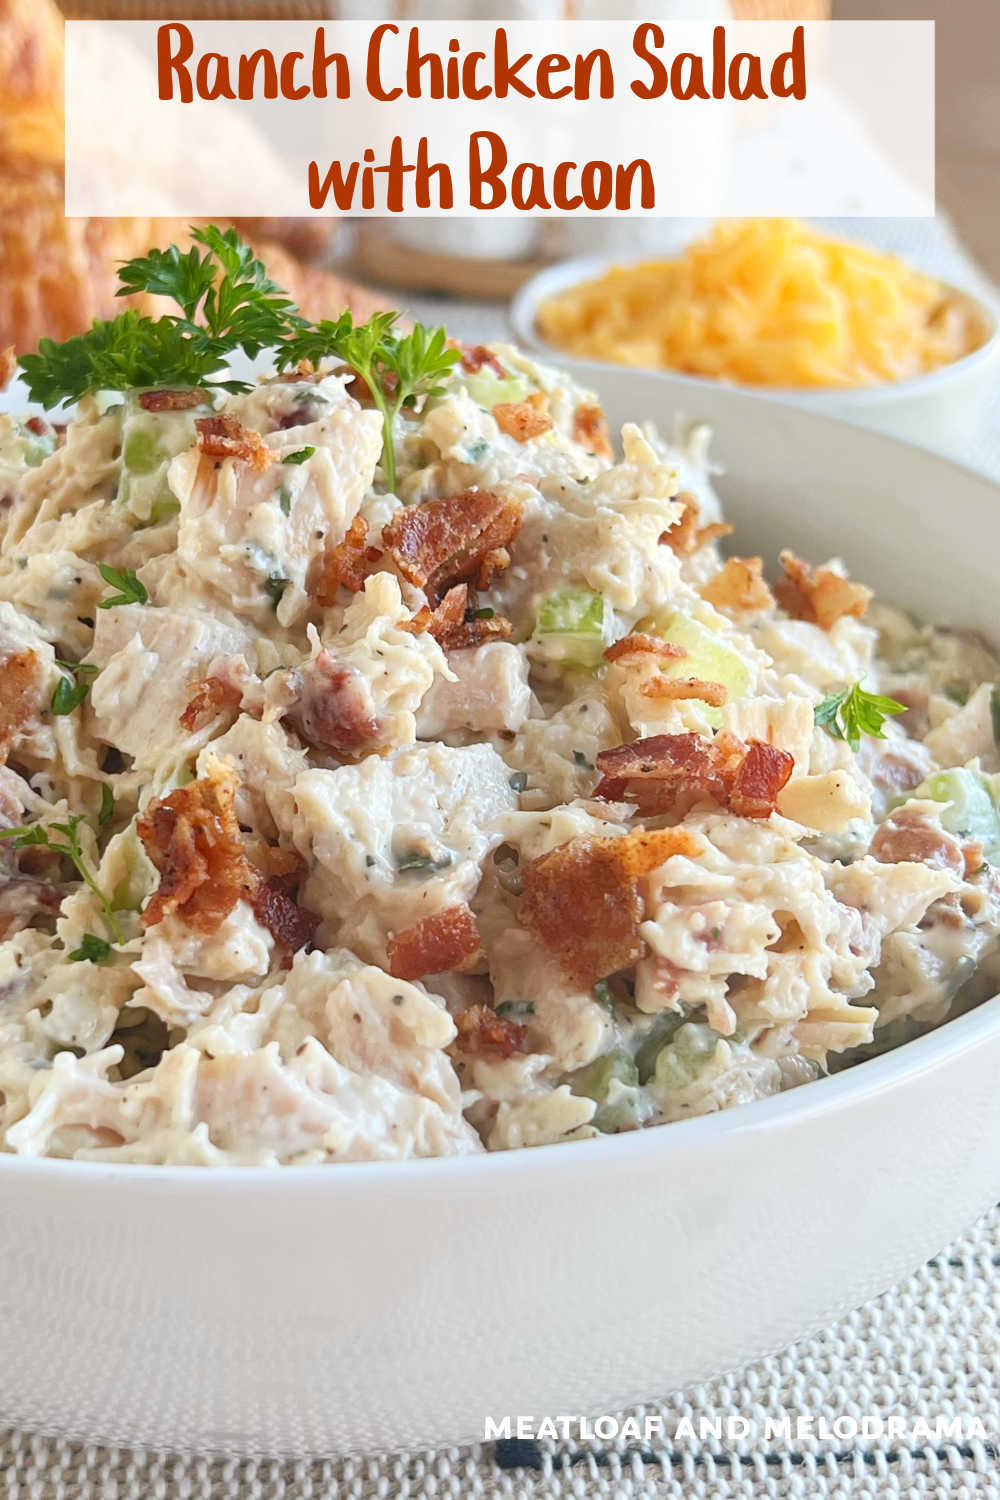 Ranch Chicken Salad with Bacon is an easy recipe for rotisserie chicken salad with ranch dressing mix, mayonnaise, celery and bacon. The whole family will love this delicious chicken bacon ranch salad! via @meamel